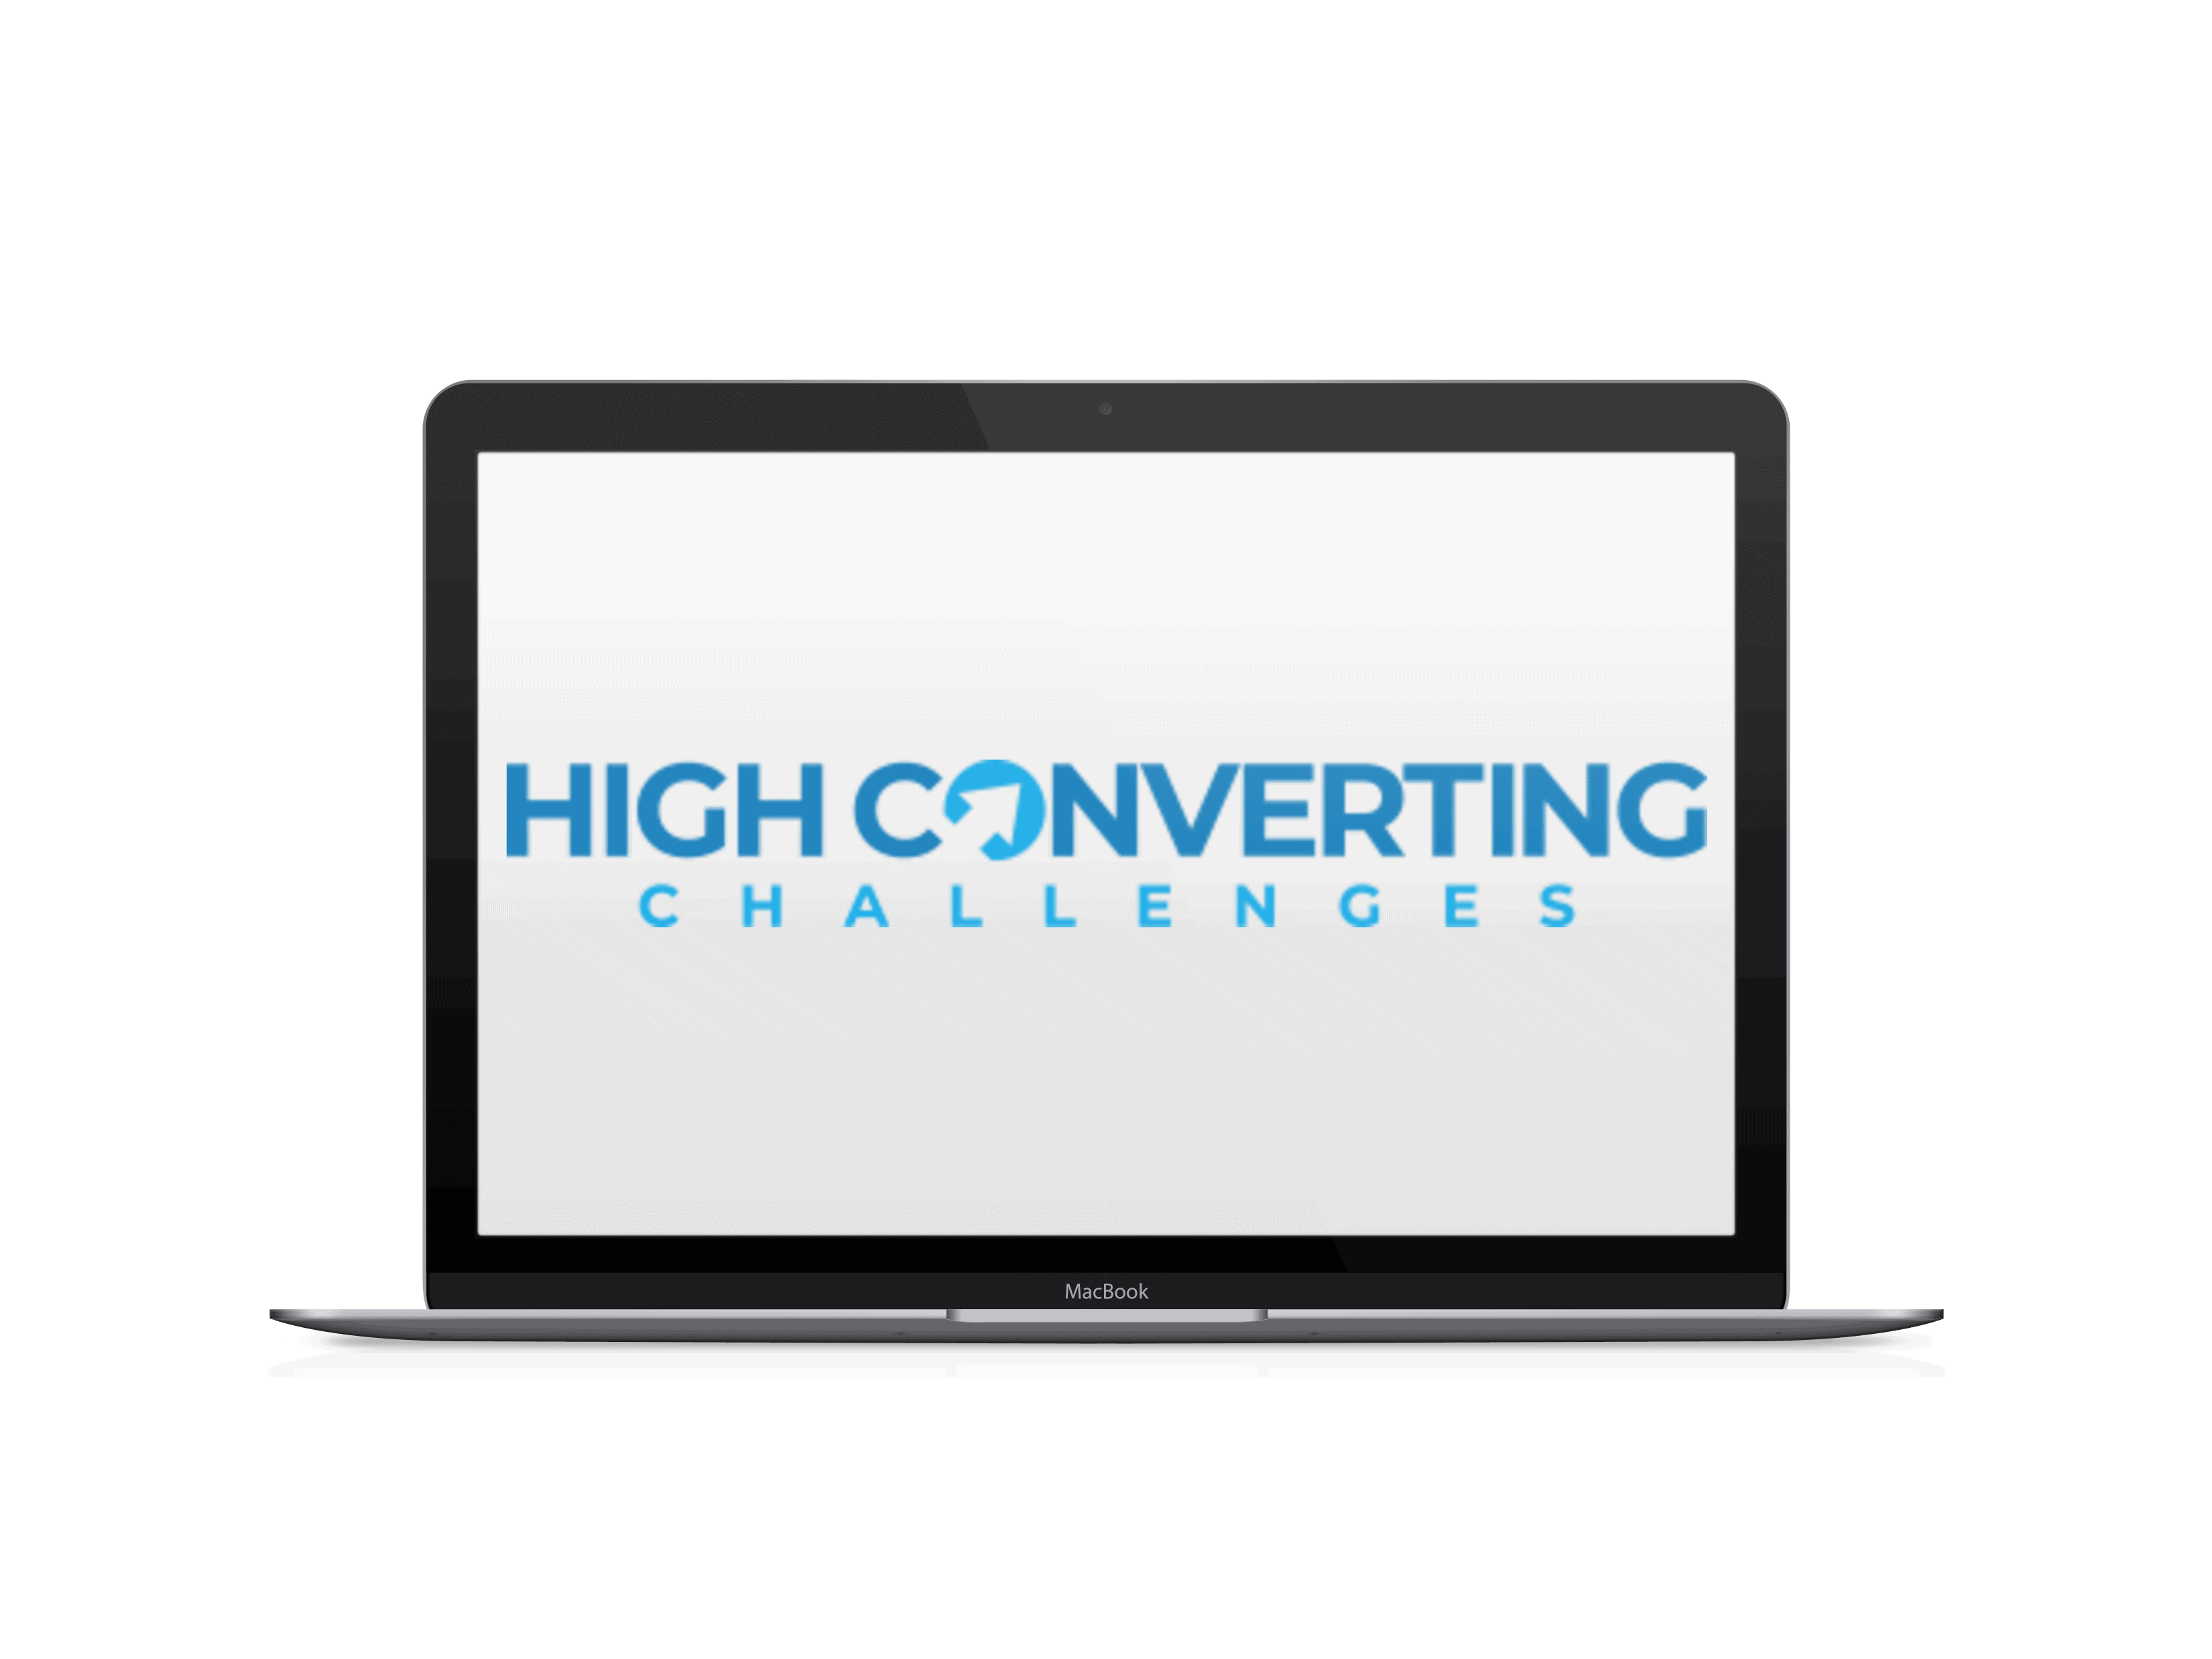 High Converting Challenges